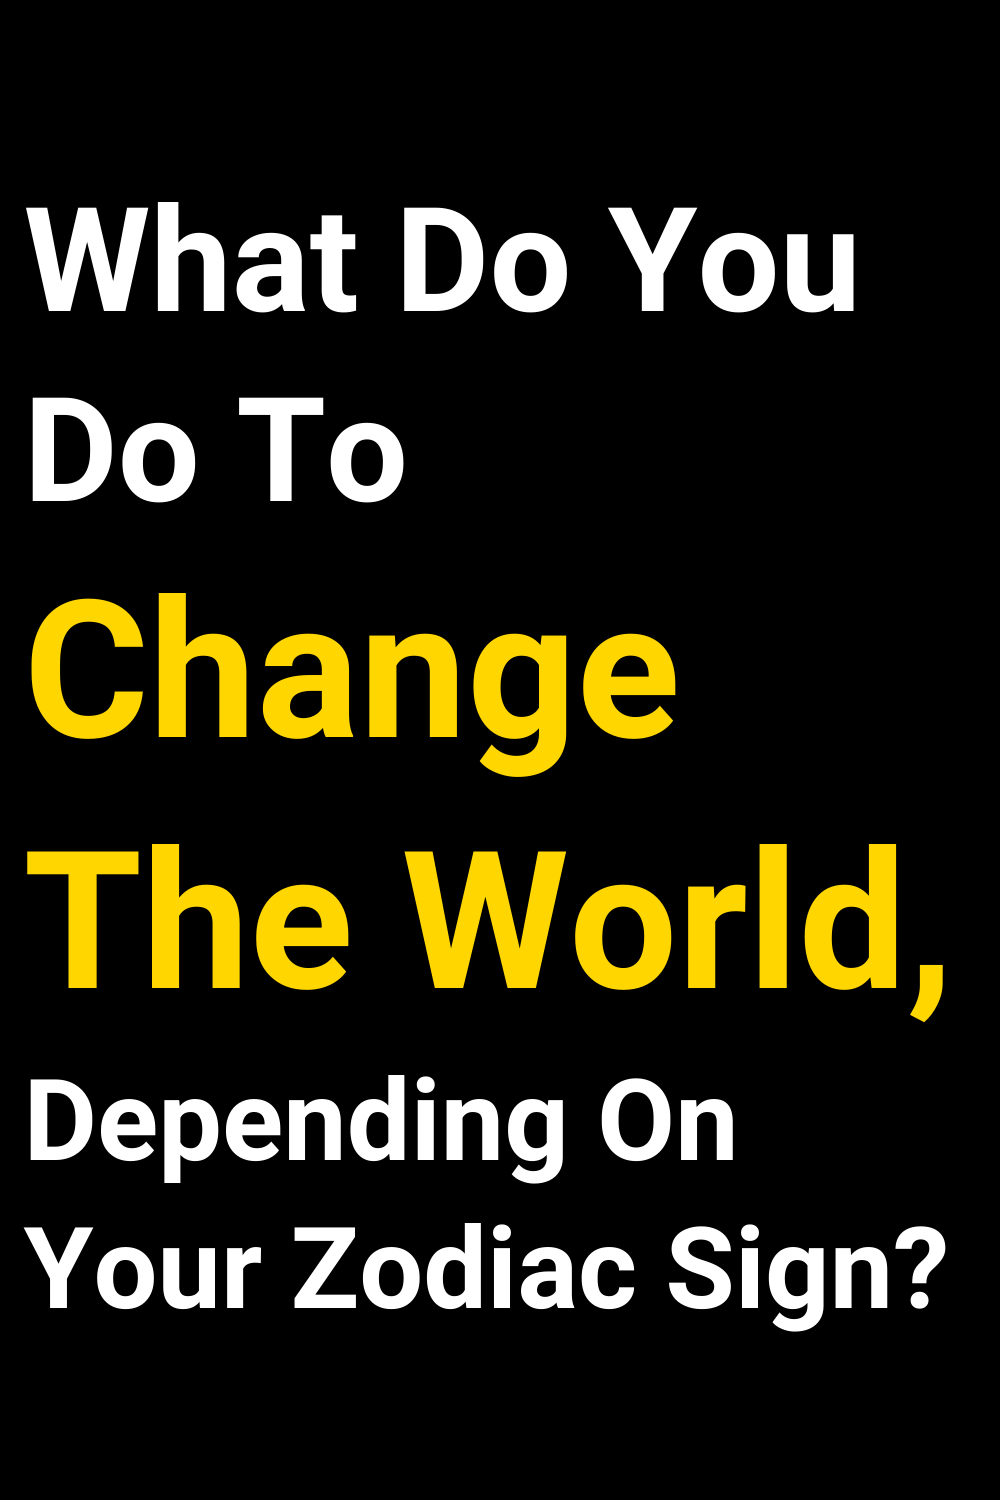 What Do You Do To Change The World, Depending On Your Zodiac Sign?